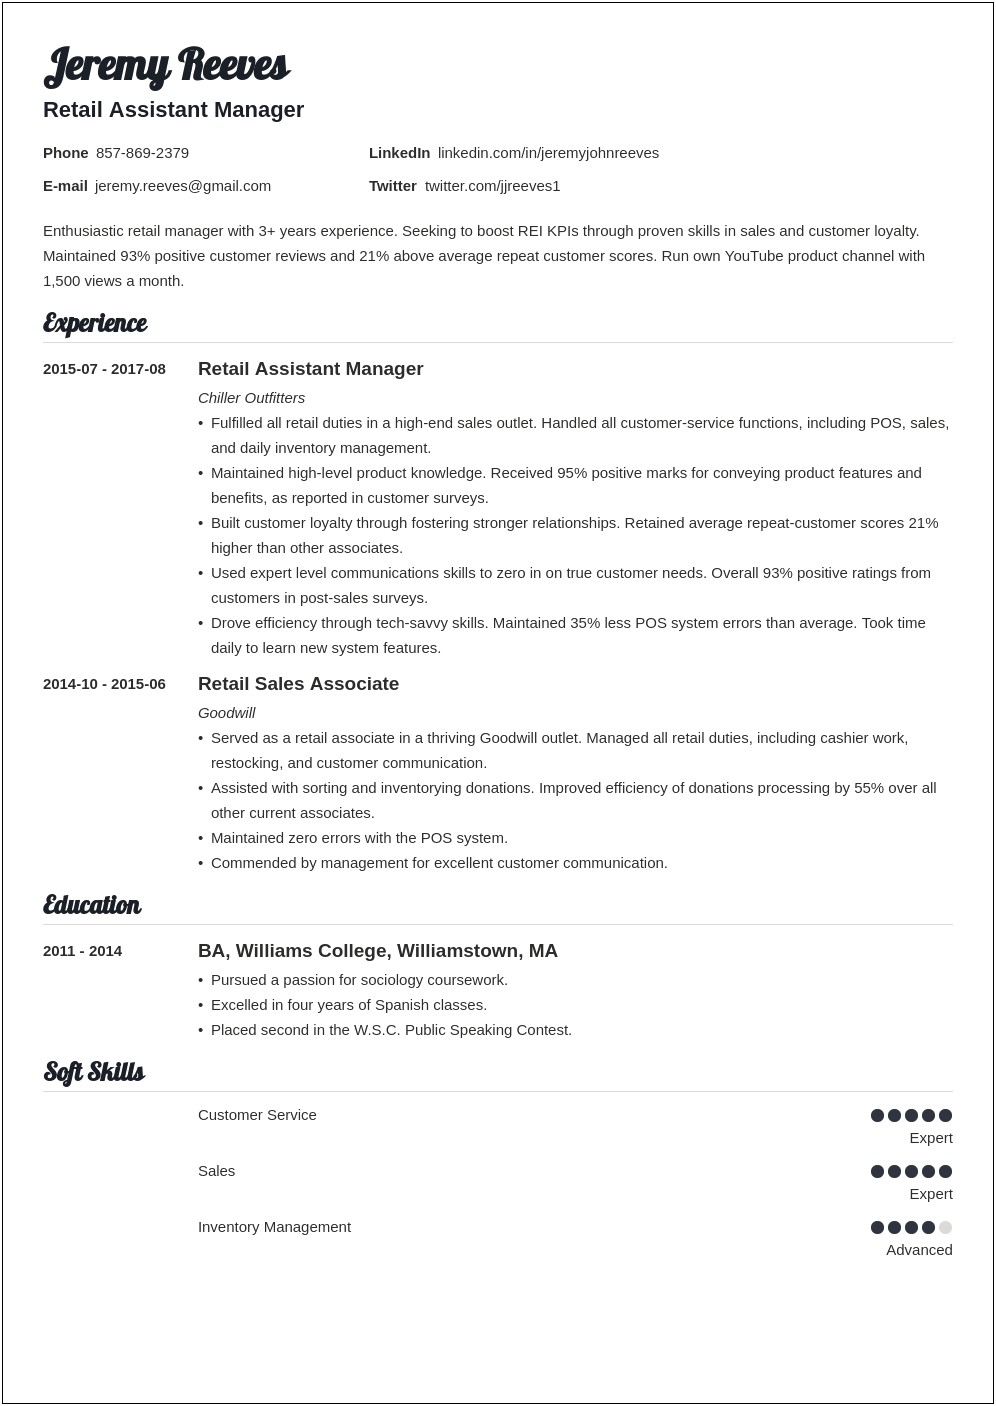 ﻿banana Republic Assistant Manager Resume